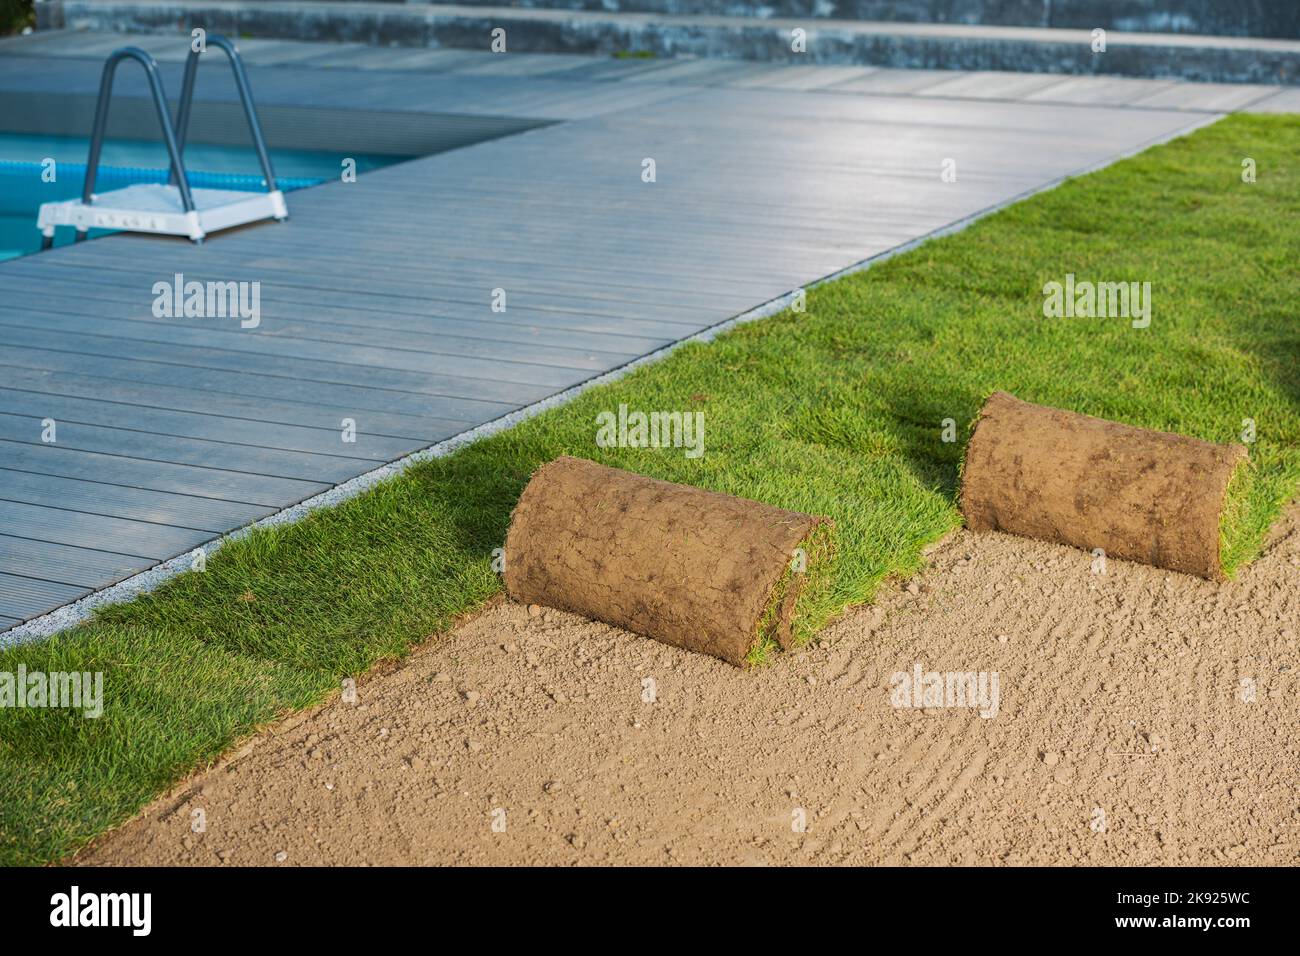 Closeup of Natural Turf Grass Rolls Next to Outdoor Swimming Pool. Roll Out Instant Lawn in the Making. Backyard Resting Area Landscape. Stock Photo